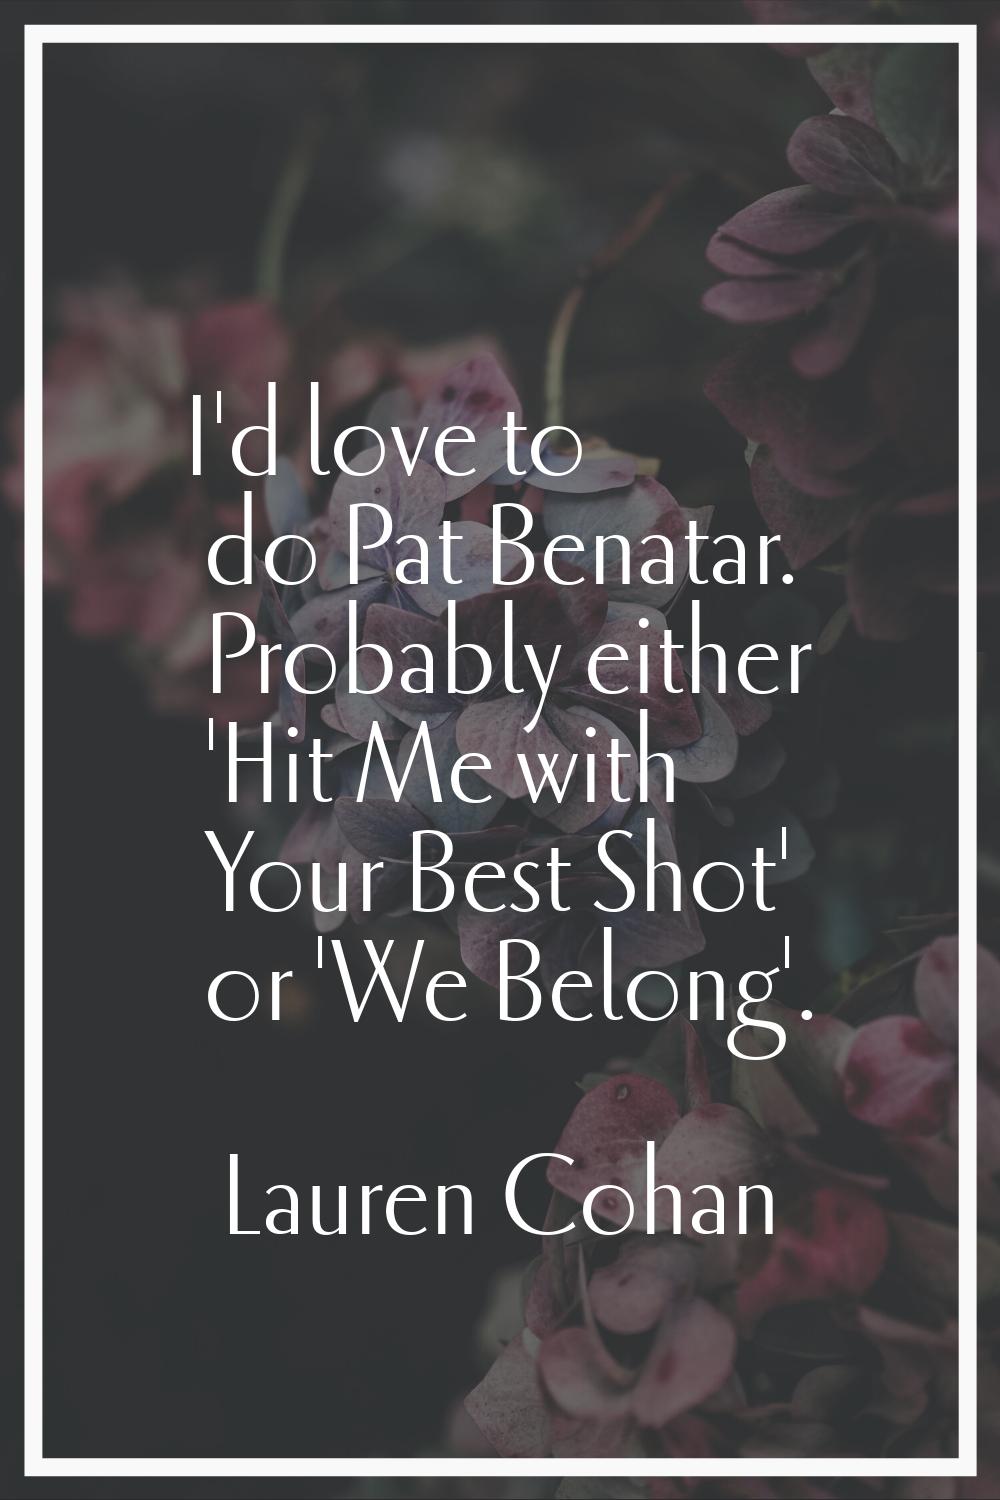 I'd love to do Pat Benatar. Probably either 'Hit Me with Your Best Shot' or 'We Belong'.